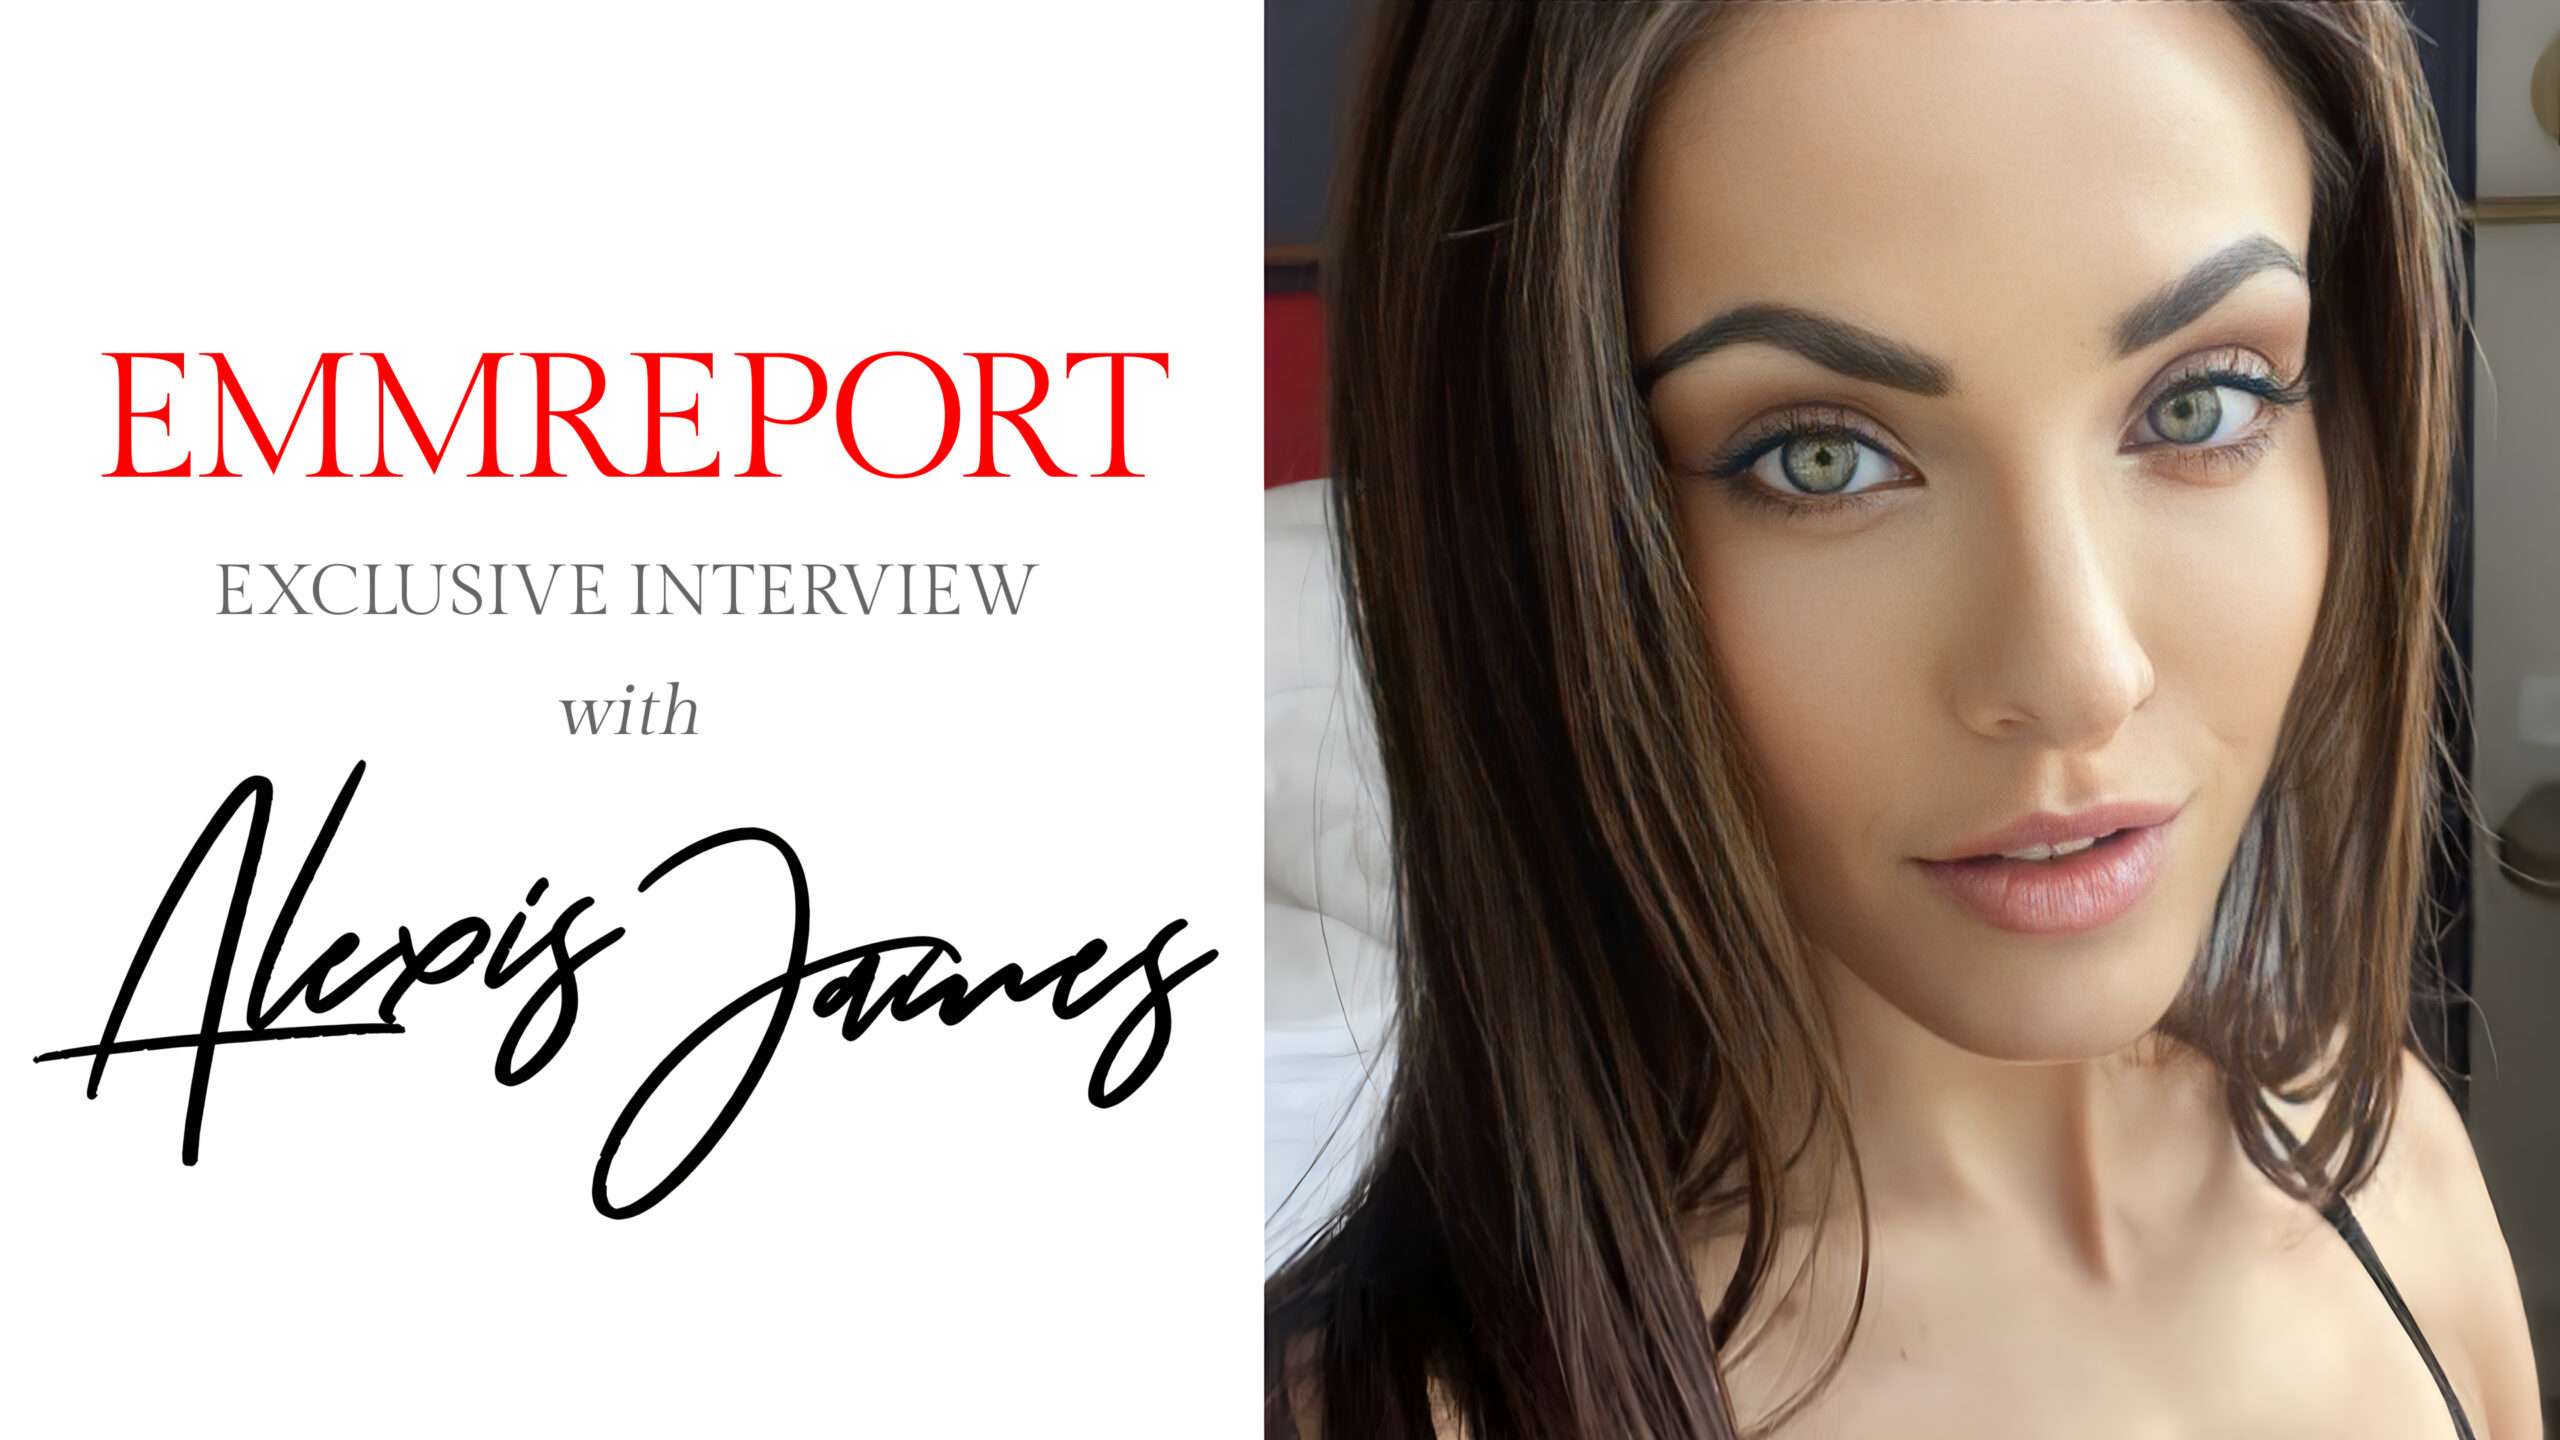 Coxxx Models Alexis James Continues to Impress, Sits Down for an Exclusive Interview with Emmreport